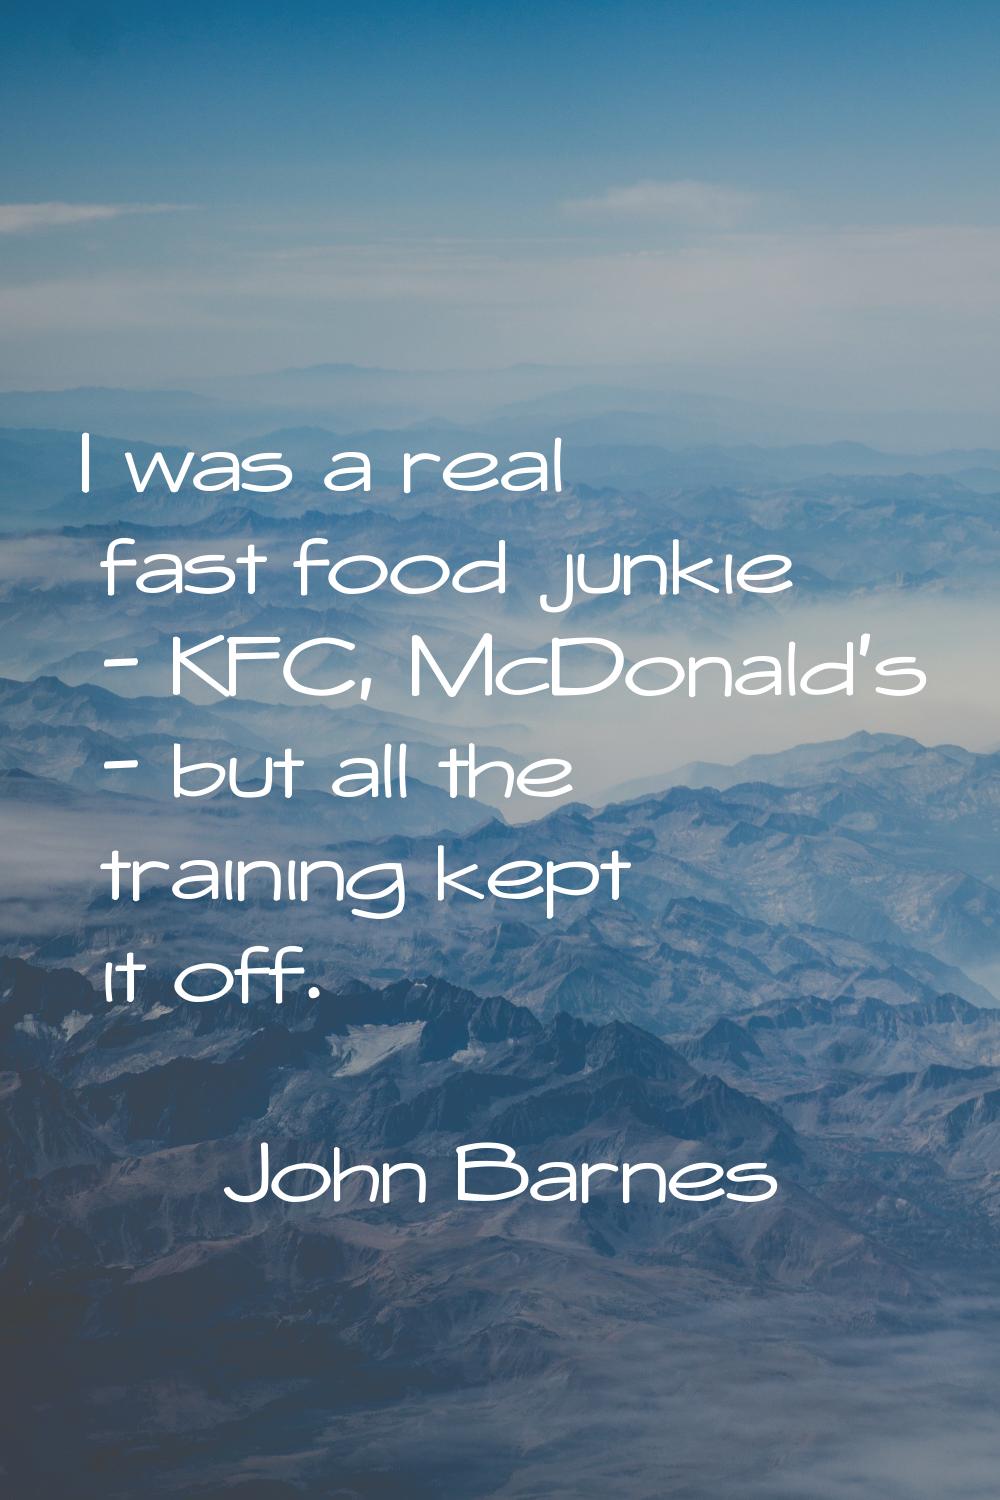 I was a real fast food junkie - KFC, McDonald's - but all the training kept it off.